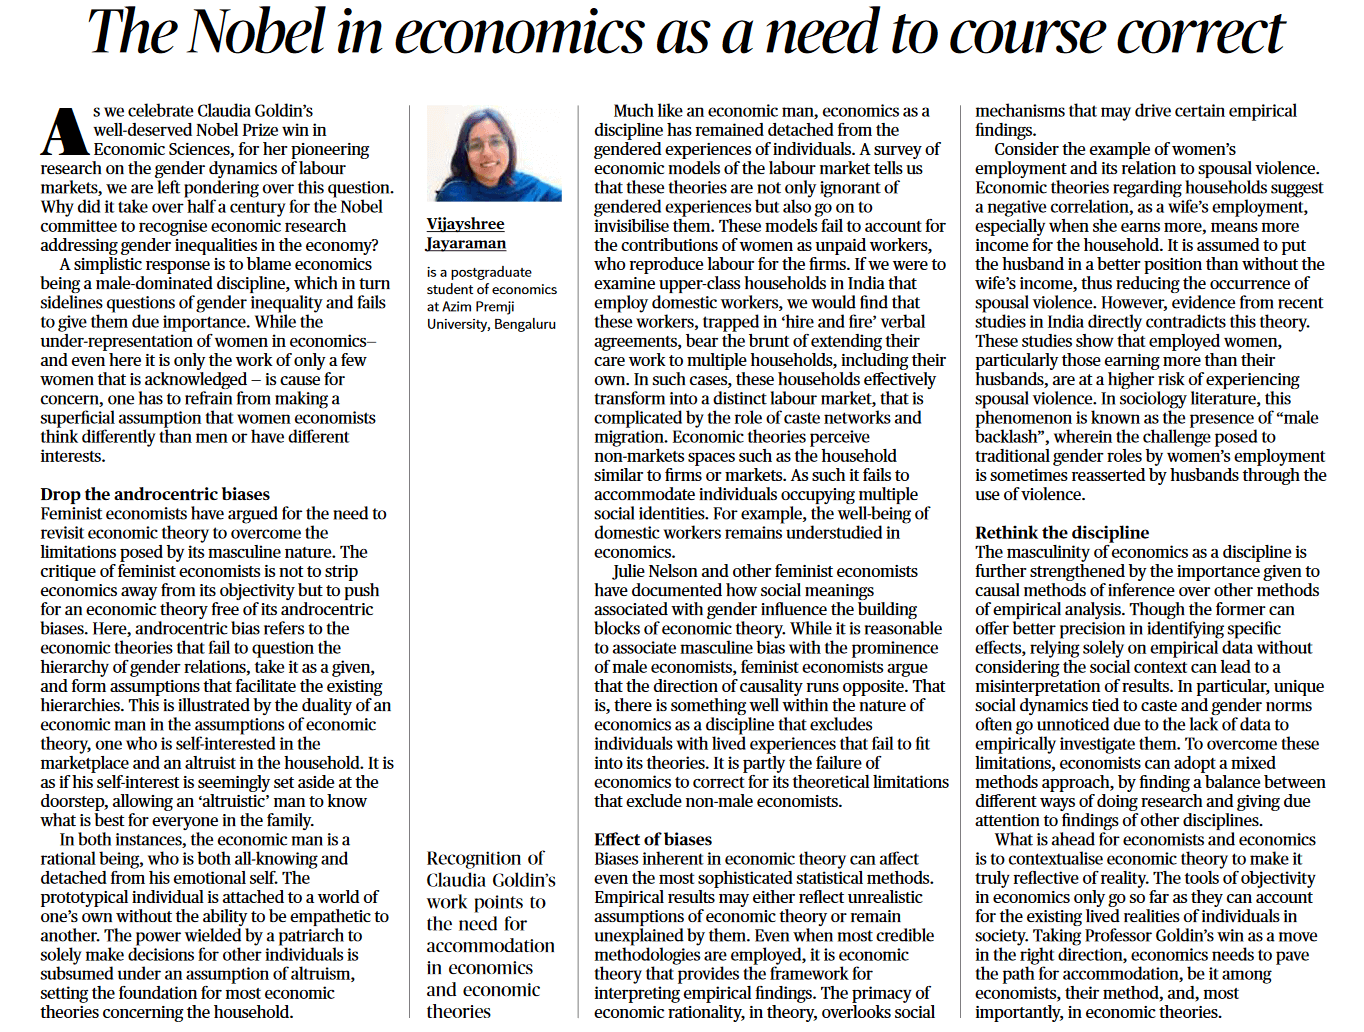 The Nobel in economics as a need to course correct - Page No.6, GS 3